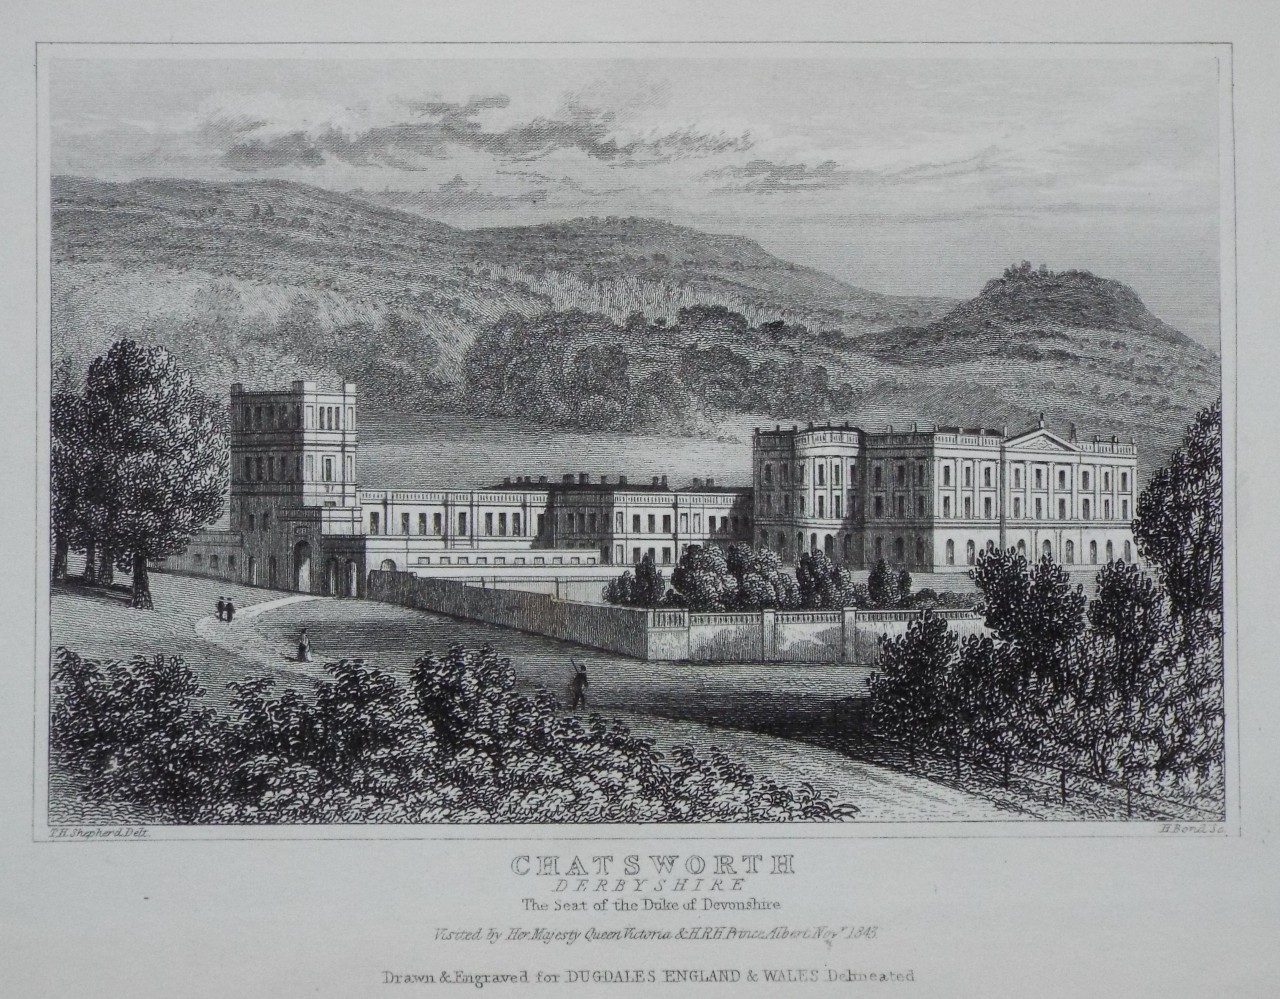 Print - Chatsworth Derbyshire The Seat of the Duke of Devonshire Visited by Her Majesty Queen Victoria & H.R.H. Prince Albert Novr 1843.